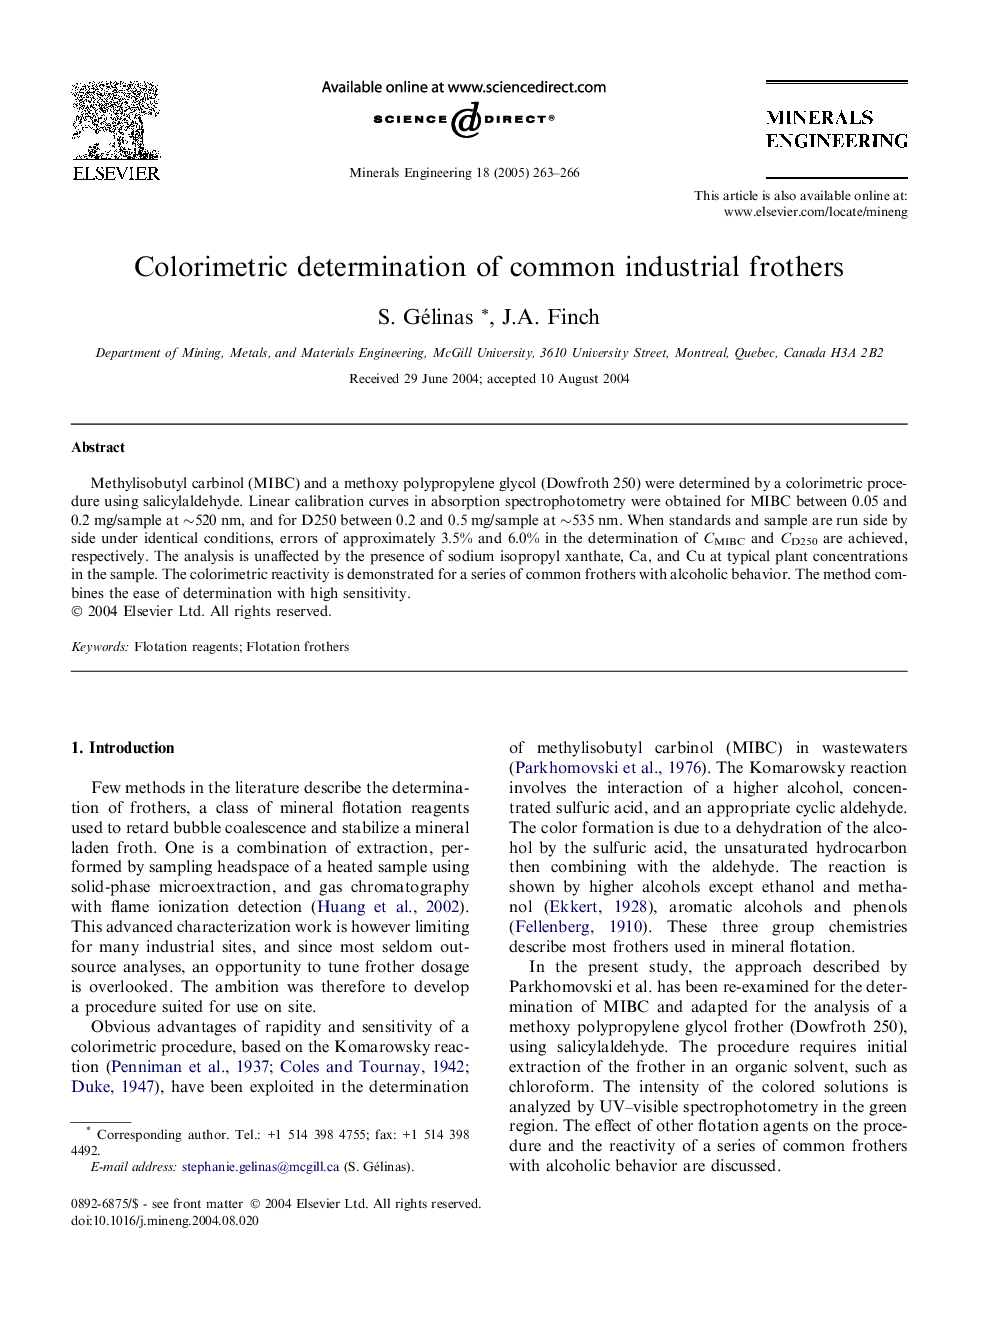 Colorimetric determination of common industrial frothers